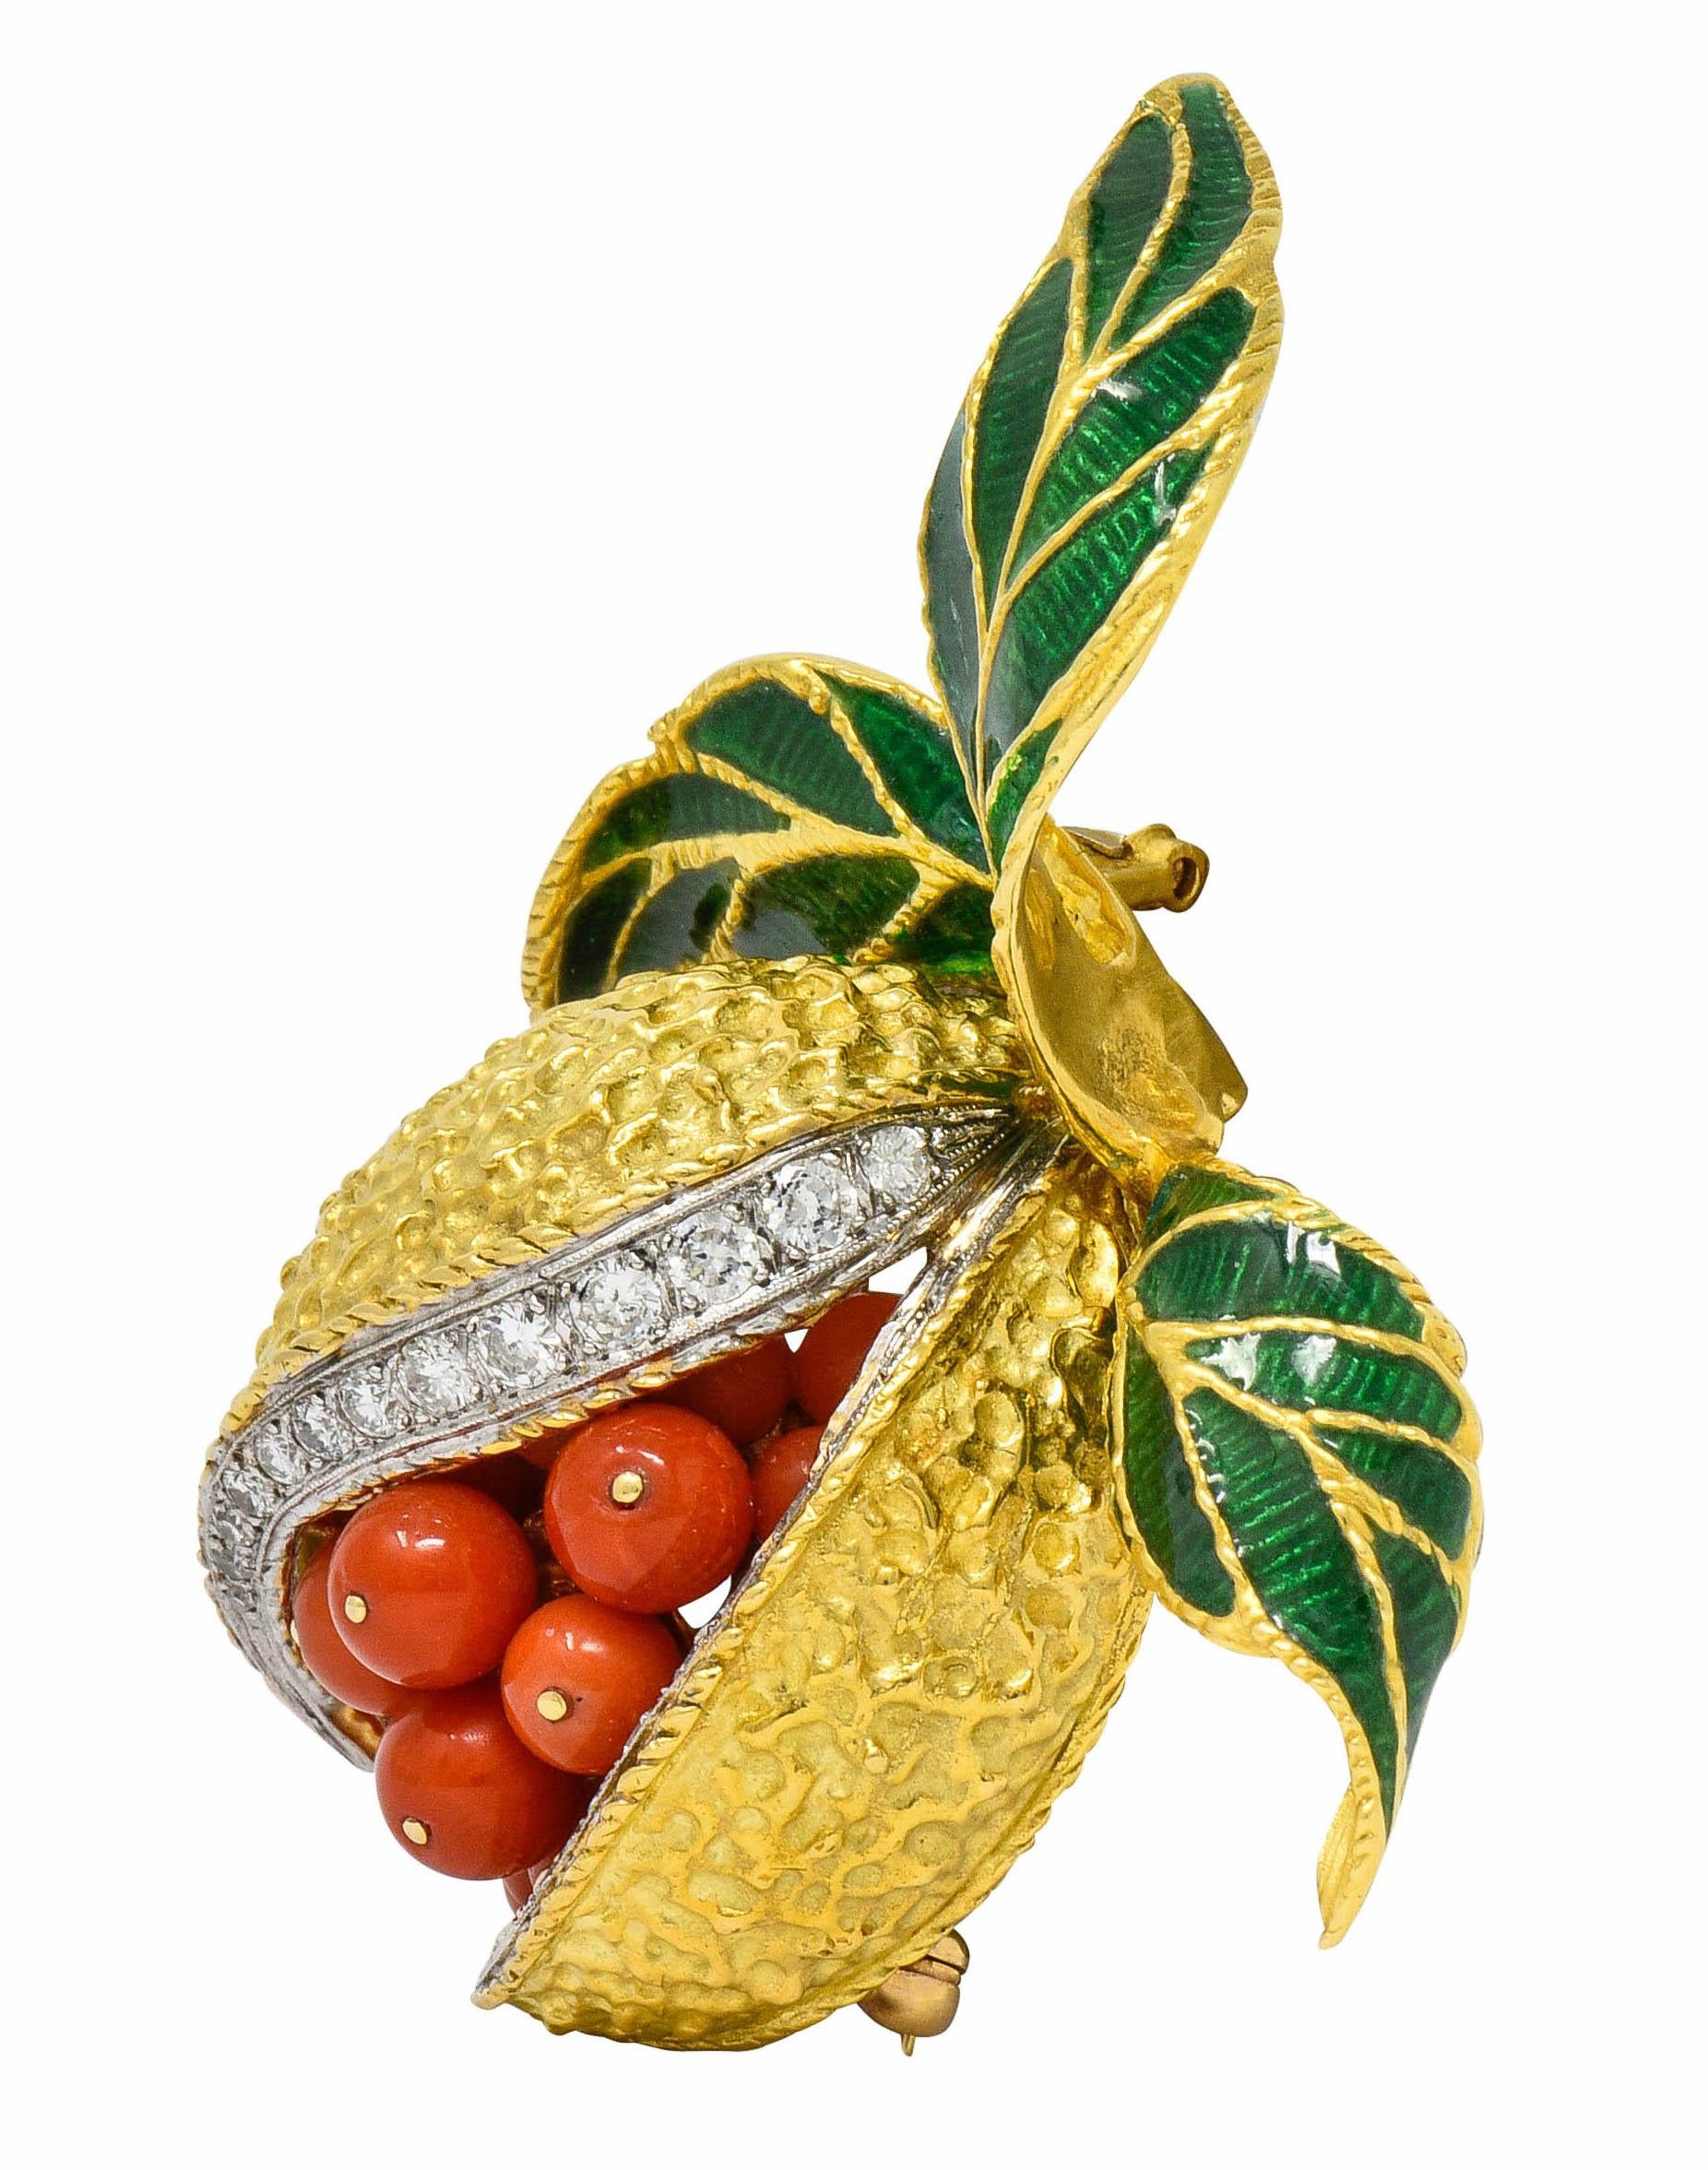 Brooch is designed as a stylized and deeply textured gold pomegranate, split down the front, revealing a cluster of coral seeds

Round cut coral beads are very well-matched with strongly reddish-orange color, measuring from 5.5 mm to 4.2 mm

With